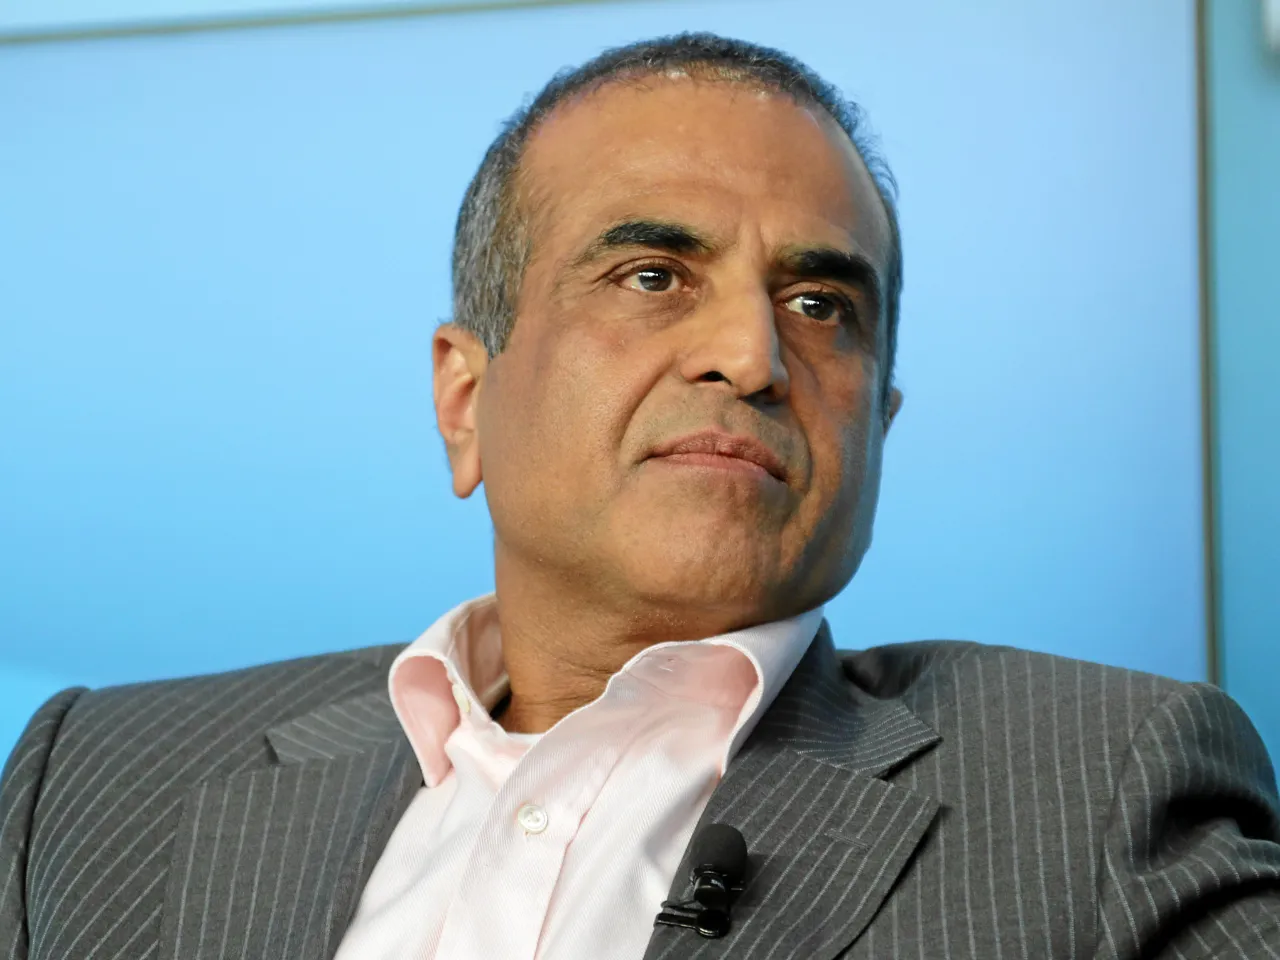 India is setting standard for next generation of telecom technology, says Airtel's Mittal